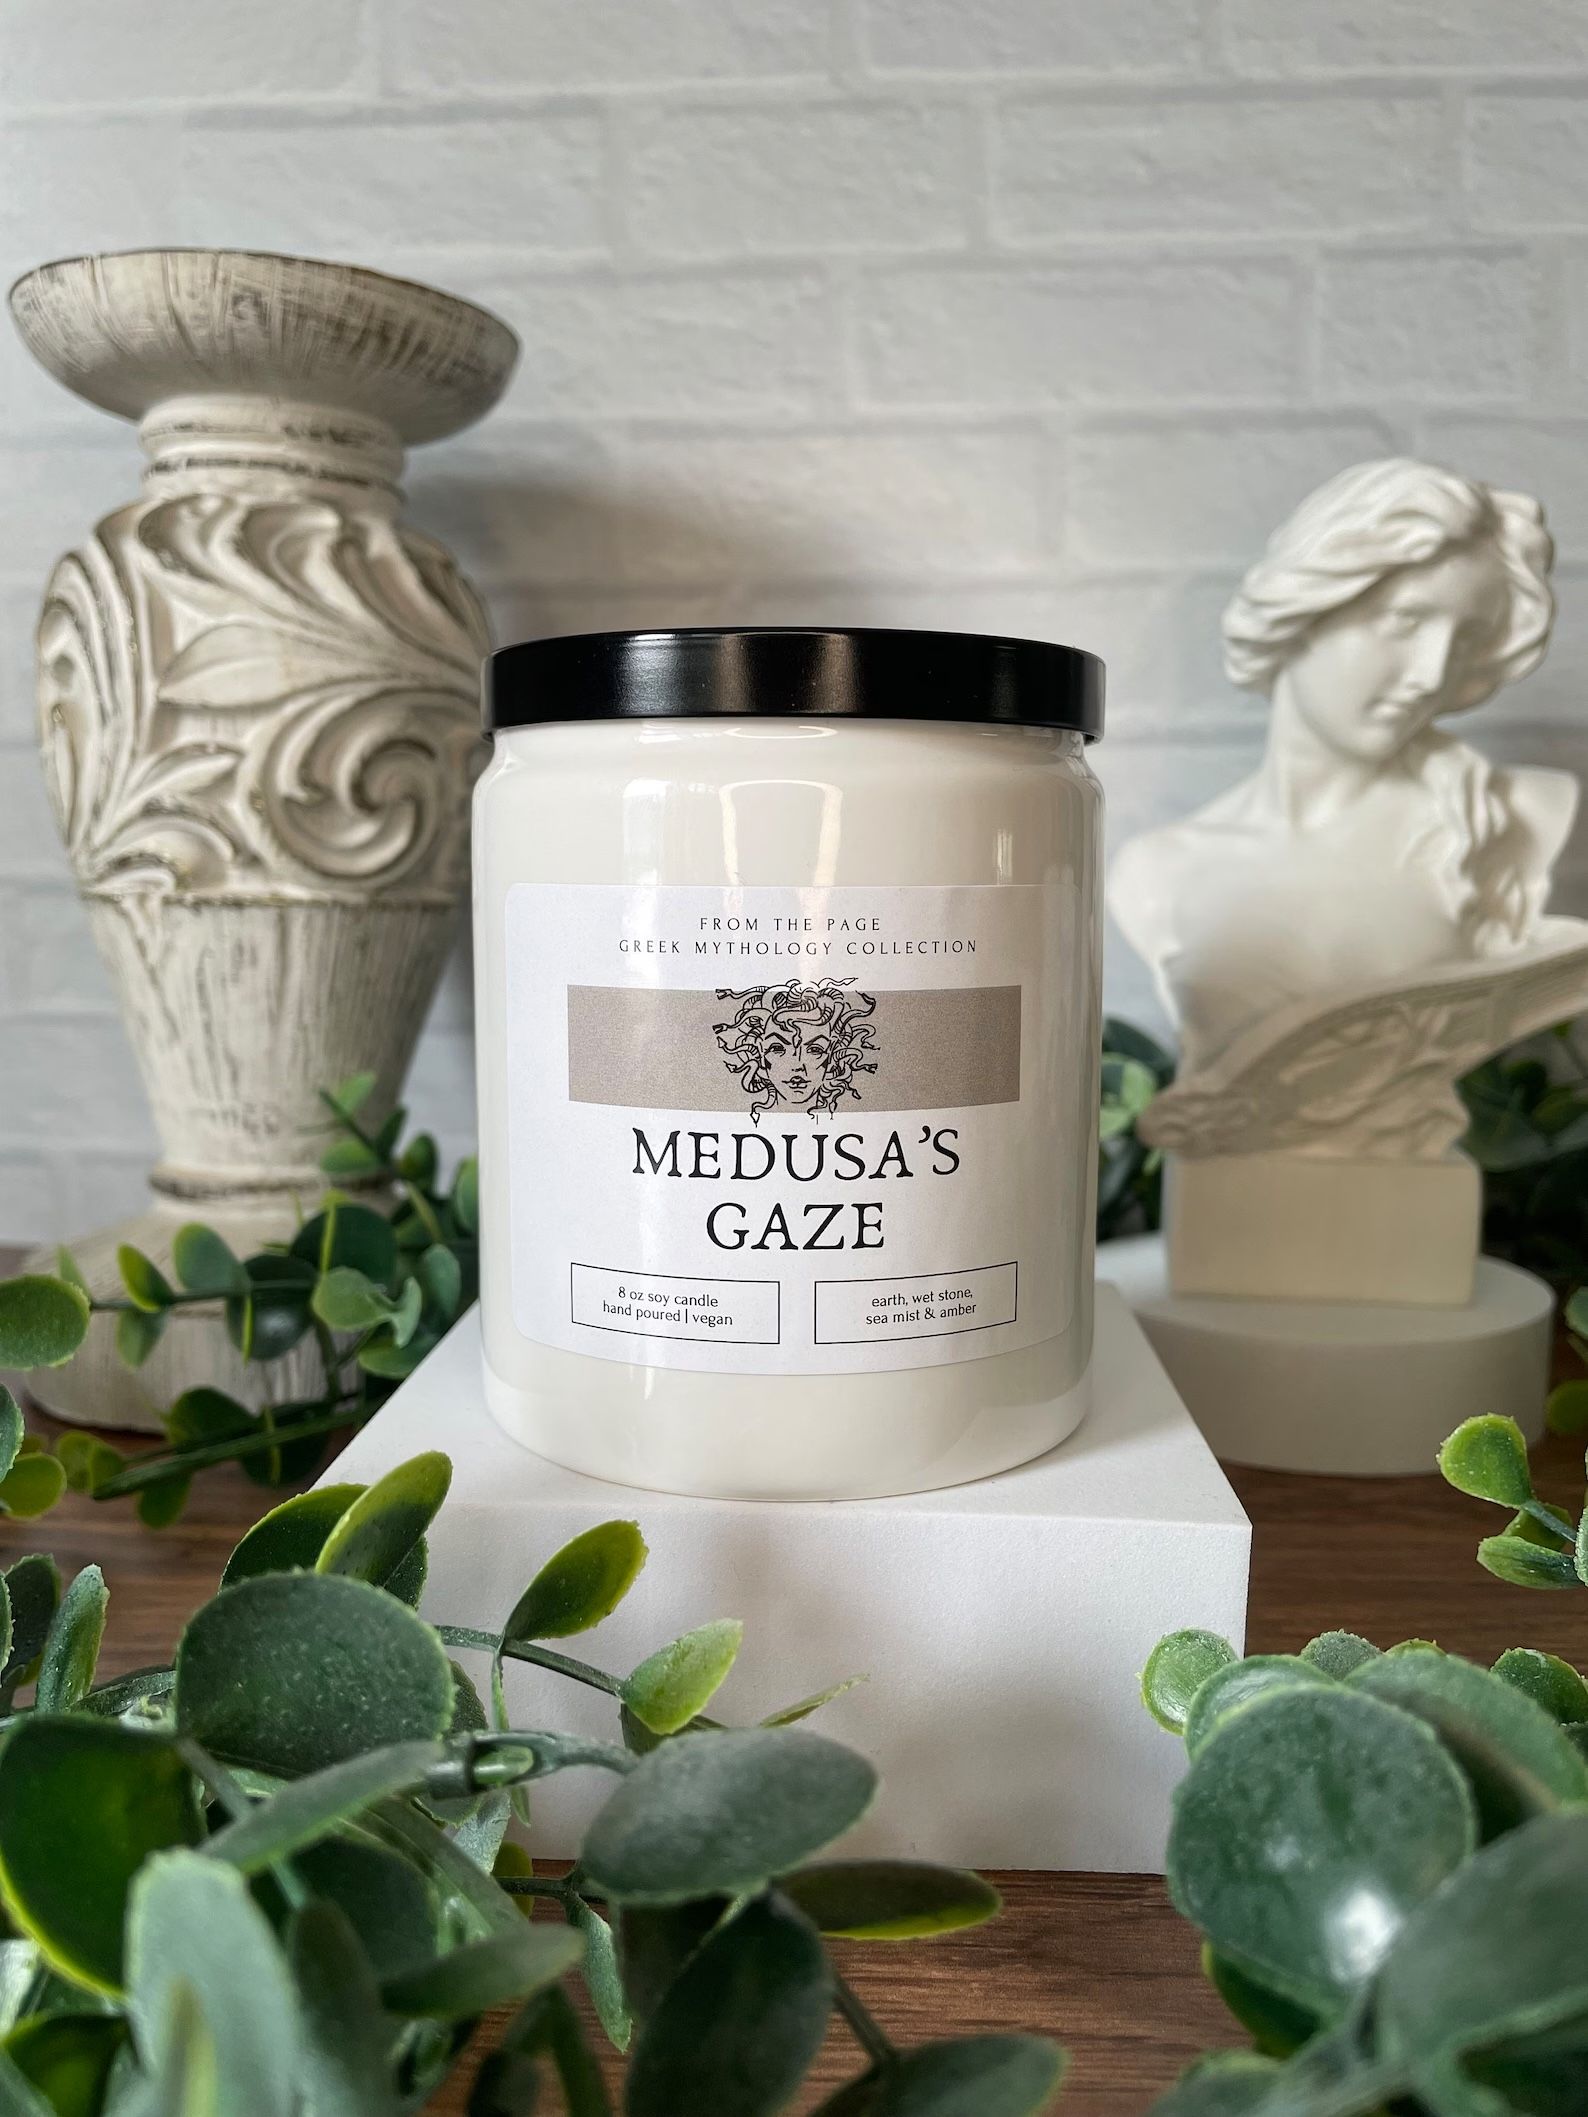 cream-colored candle with a label that reads "Medusas's Gaze"